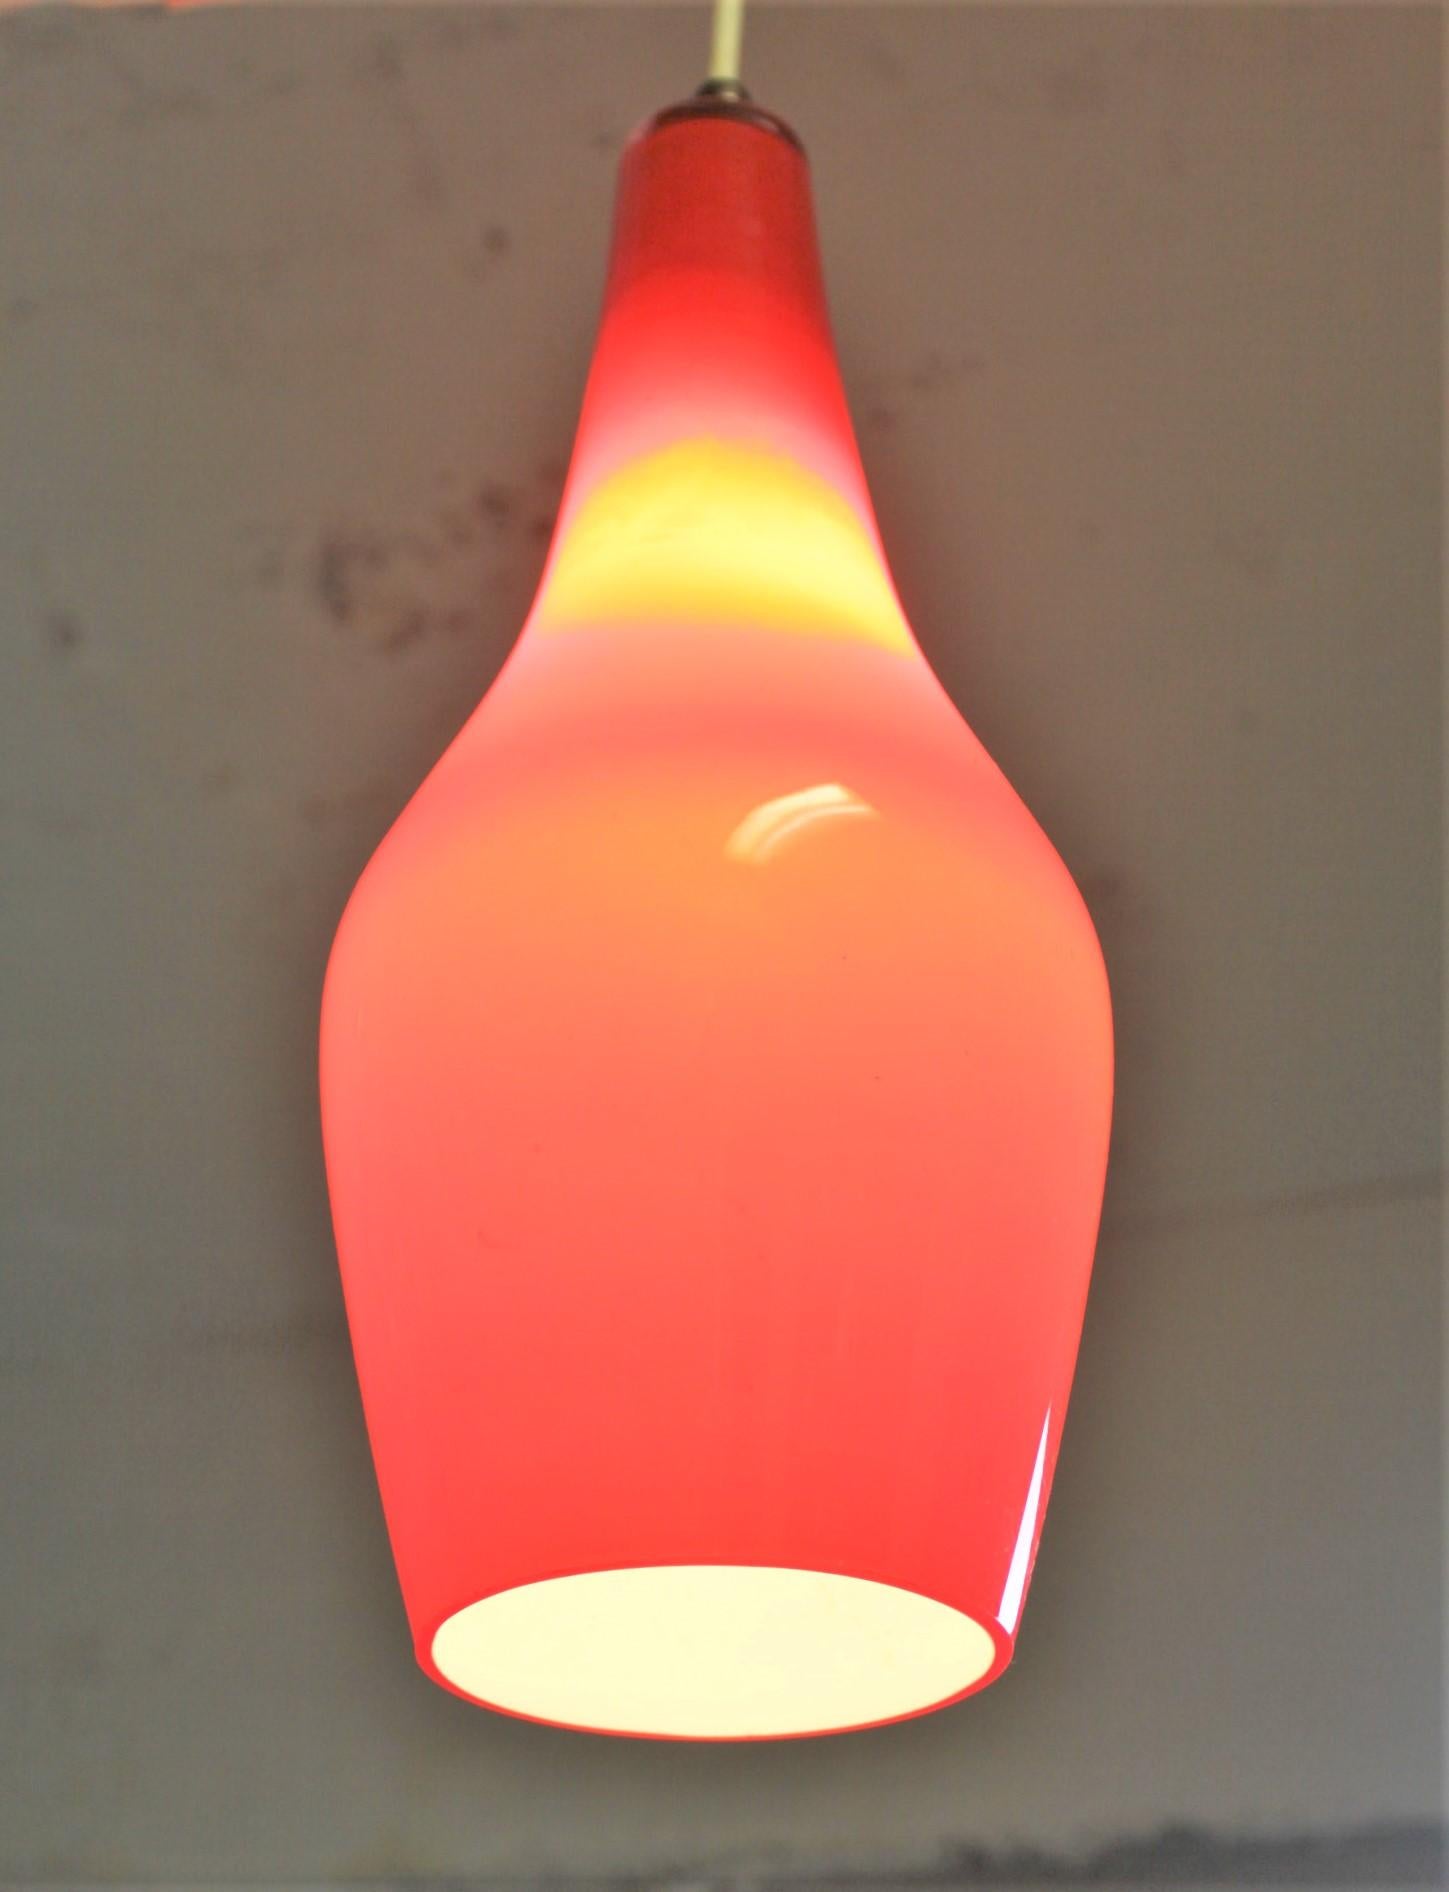 This handcrafted cased glass pendant light fixture is unsigned, but presumed to have been made in Italy or Scandinavia in circa 1965 in the Midcentury Fog and Morup style. The shade is done in a bright vivid red colored glass over white with a